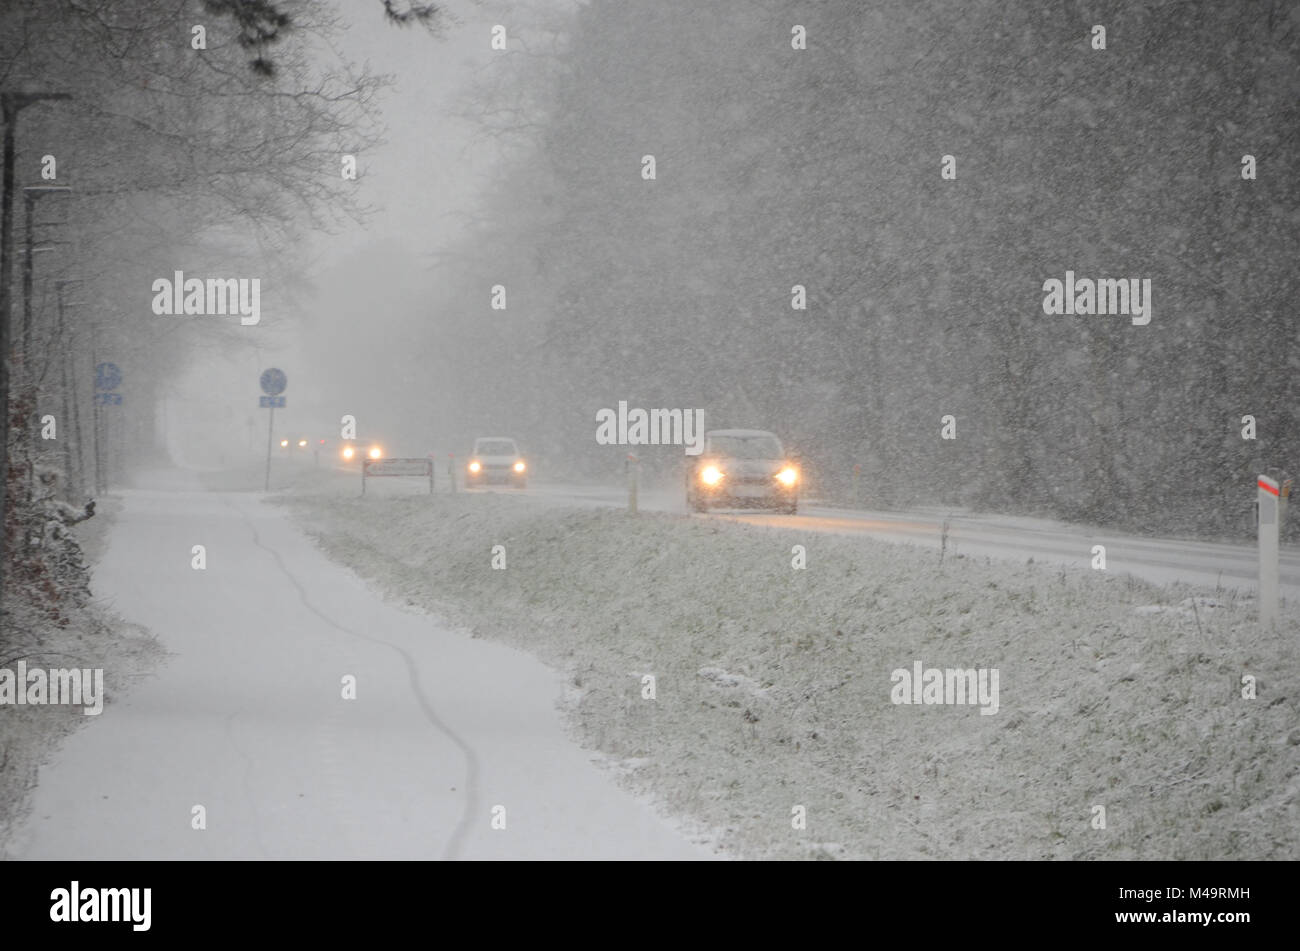 Sparse traffic moving slowly, on a road during heavy snowfall that causes reduced visibility. Stock Photo